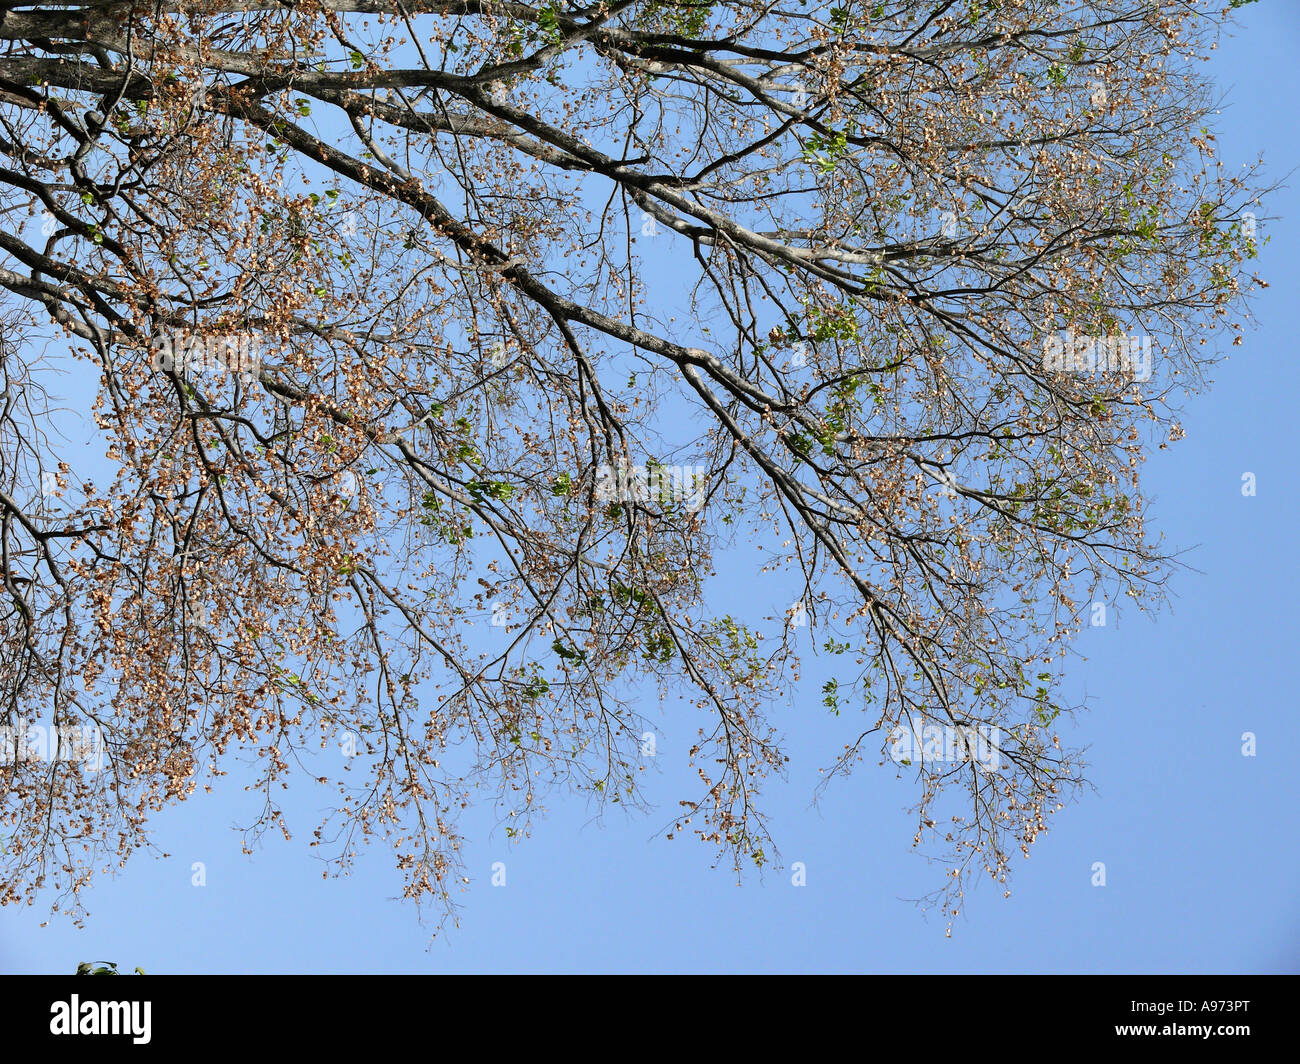 Dry tree branches with a pods, Empress garden, Pune, Maharashtra, India. Stock Photo